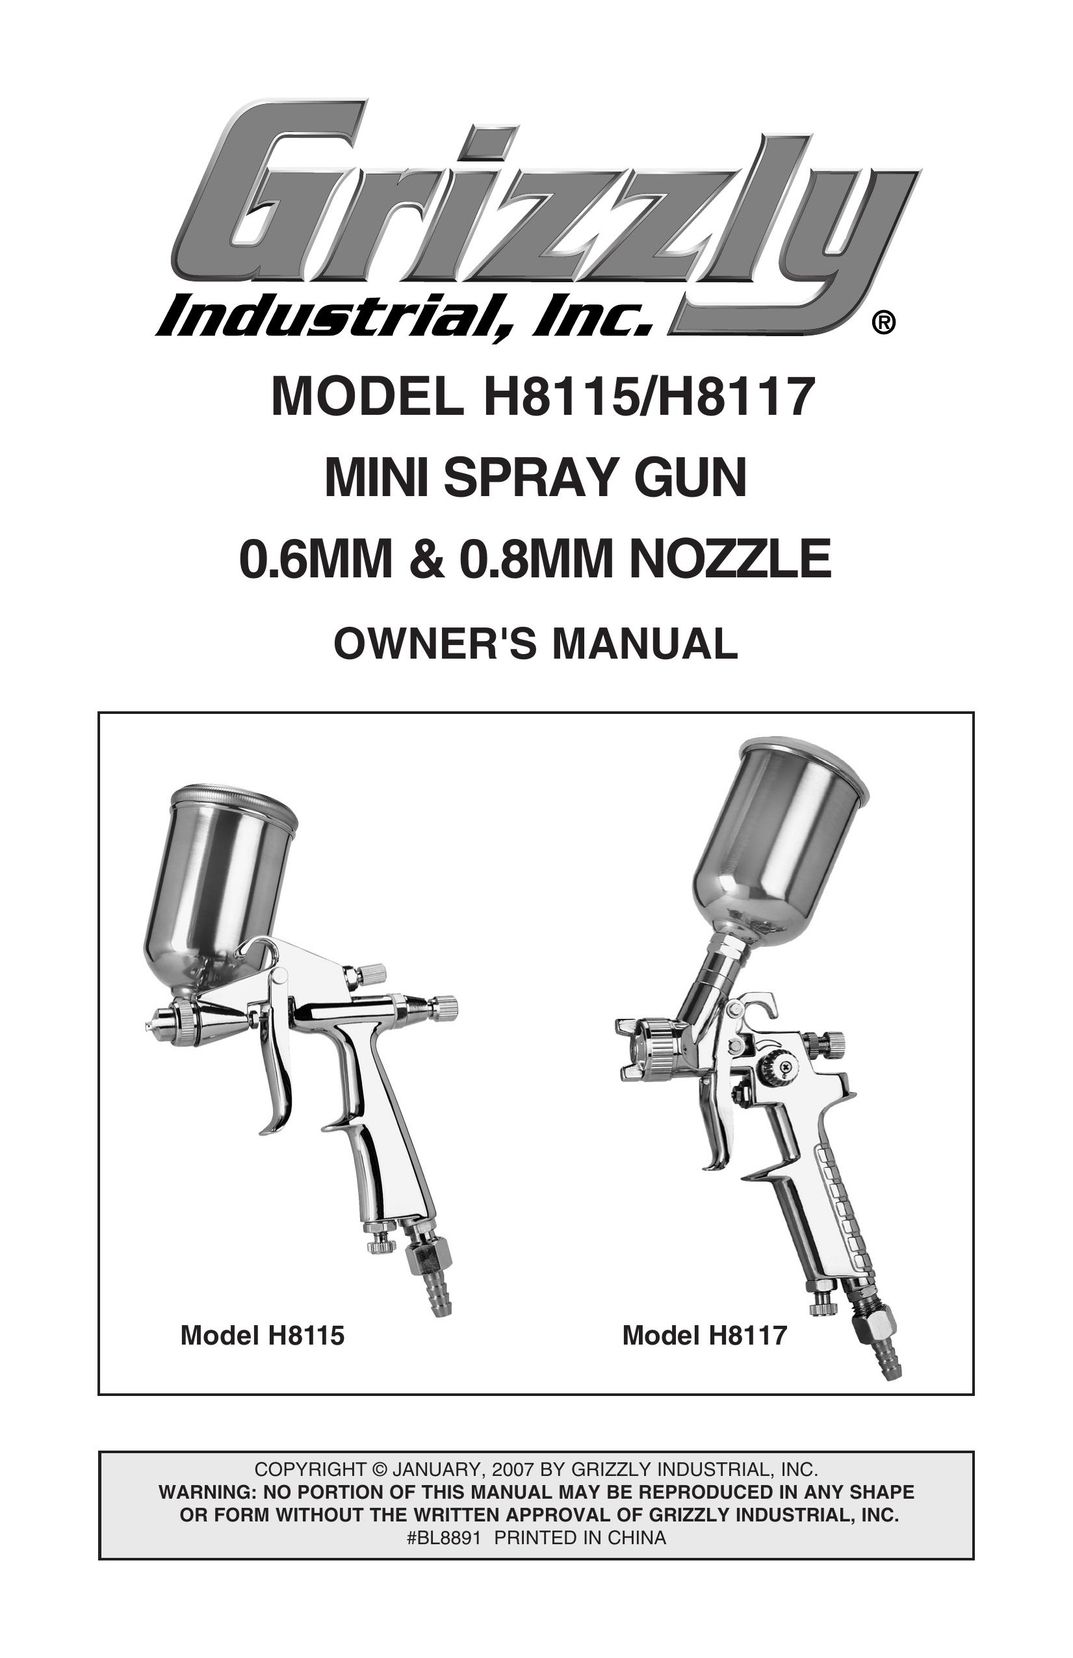 Grizzly H8117 Paint Sprayer User Manual